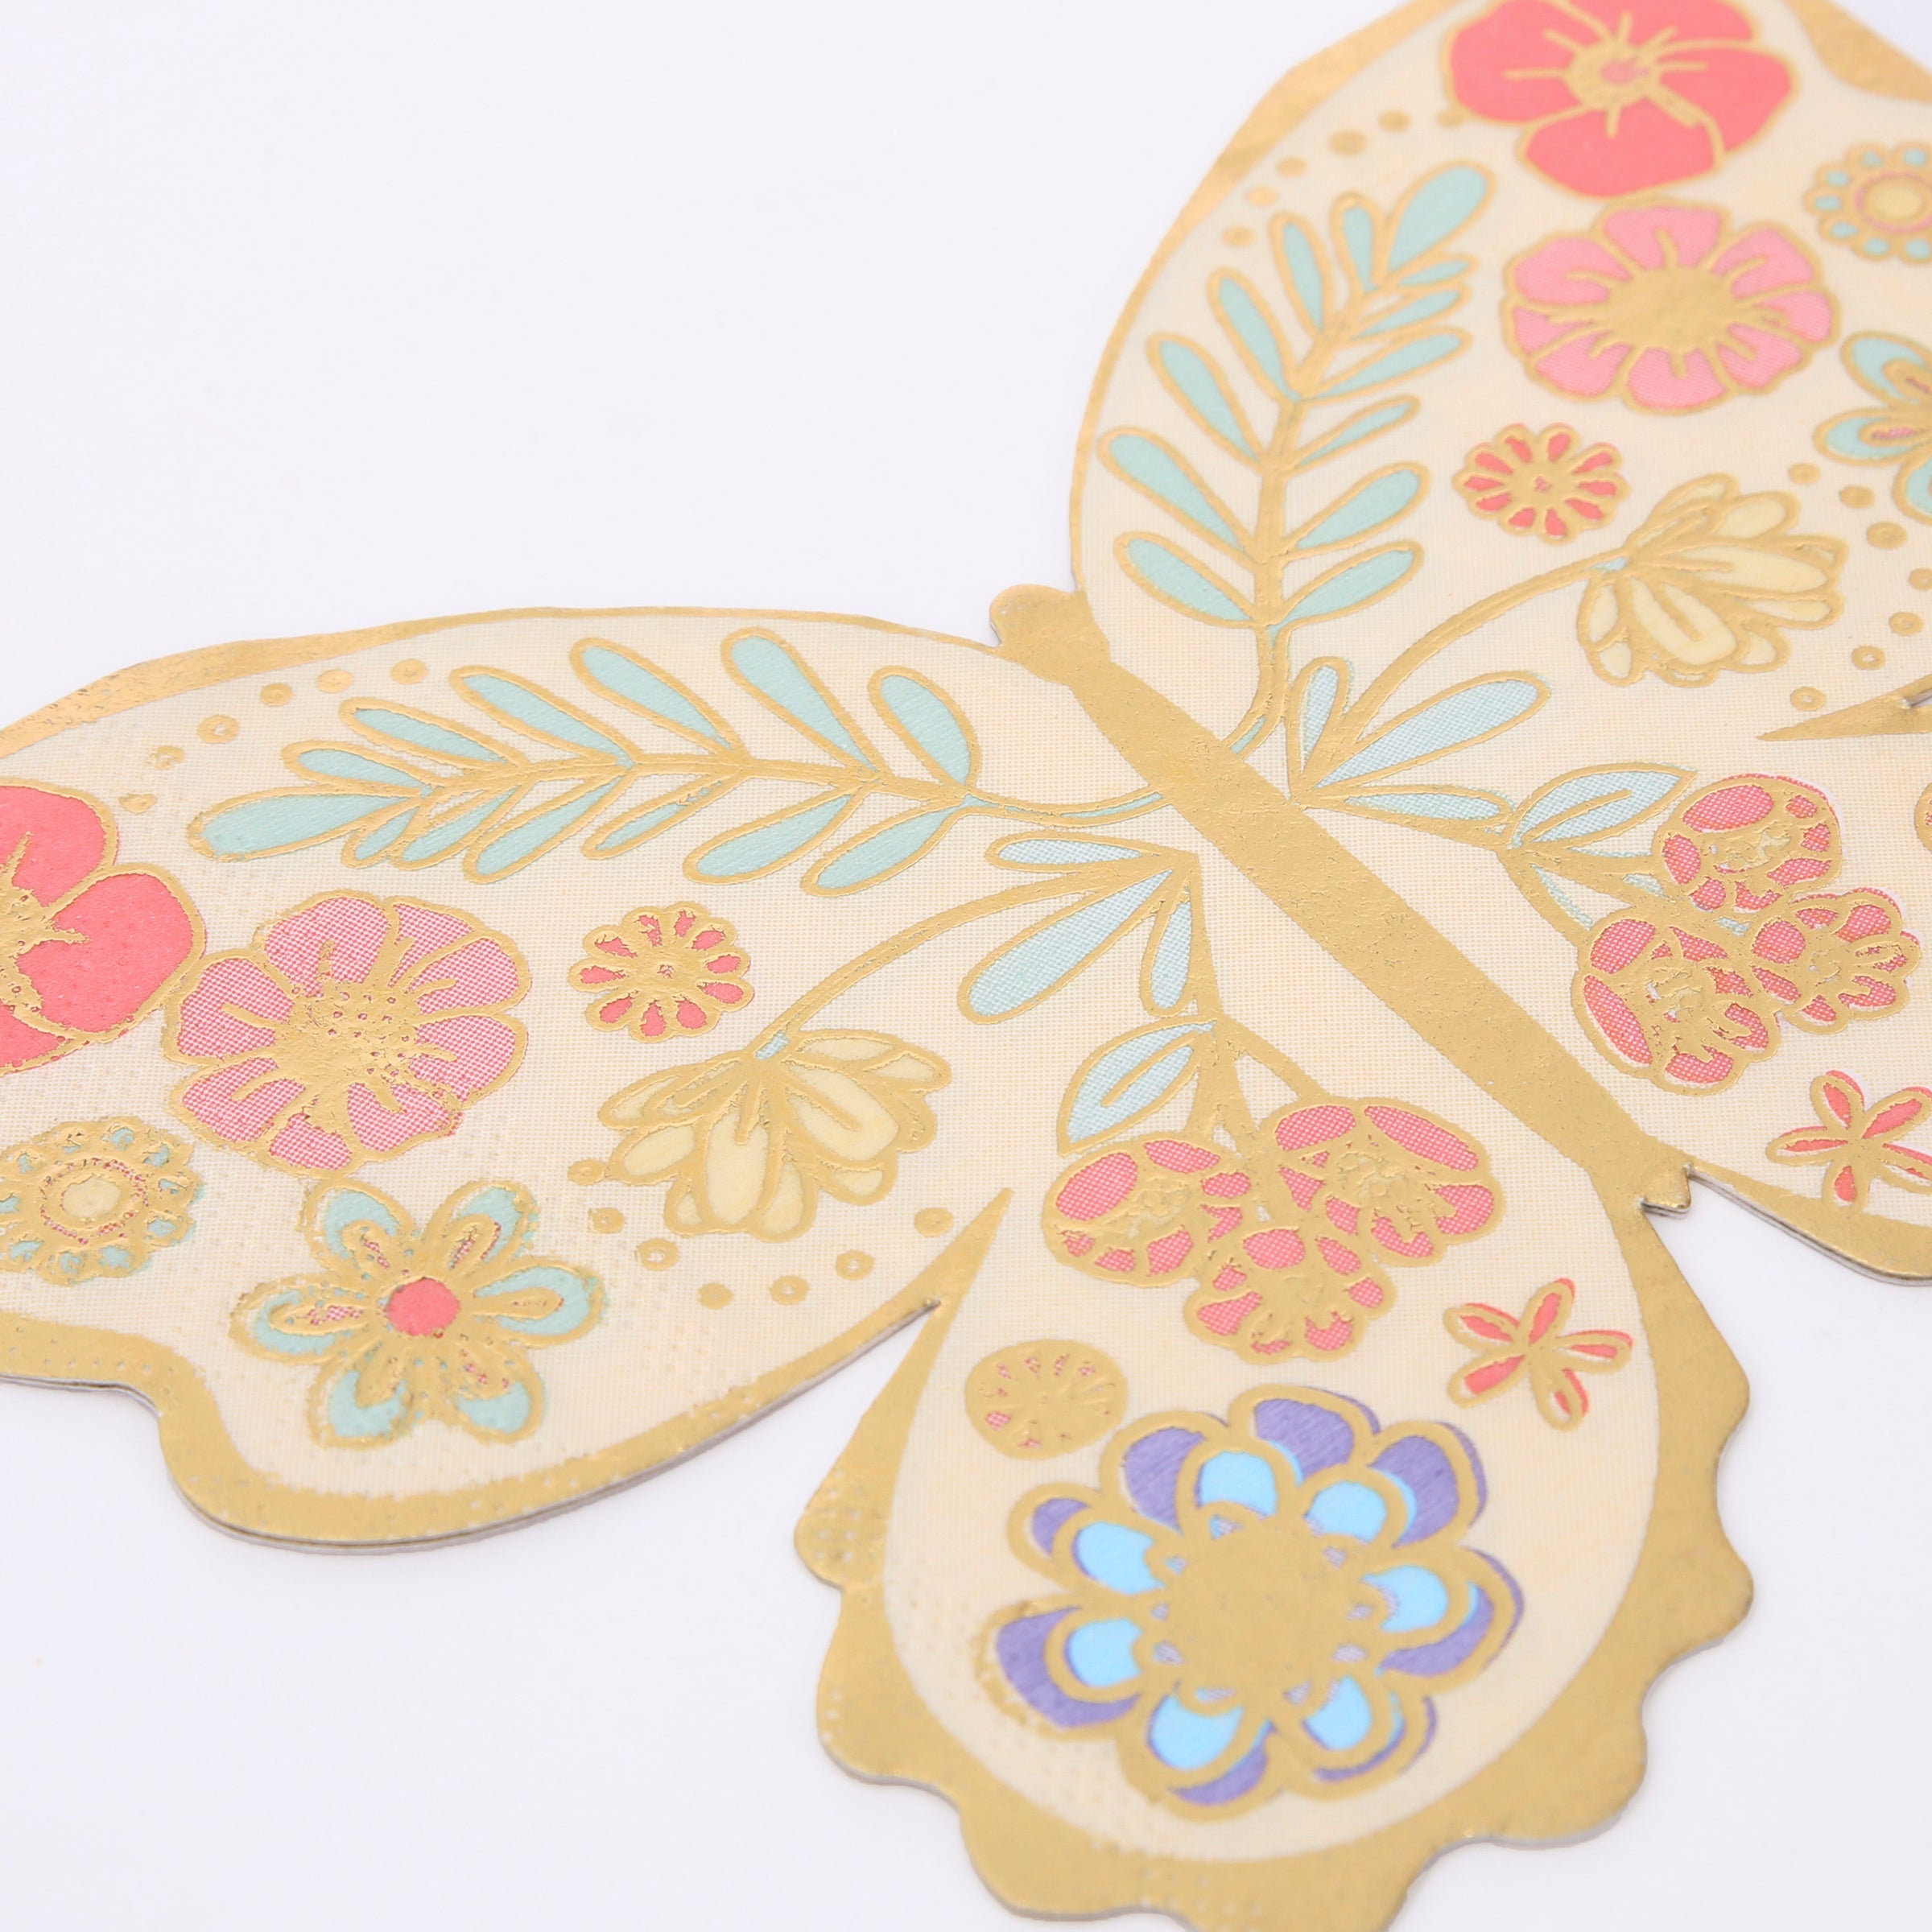 Our party napkins, butterfly shaped with lots of shiny gold foil, will look amazing at a fairy party or butterfly party.